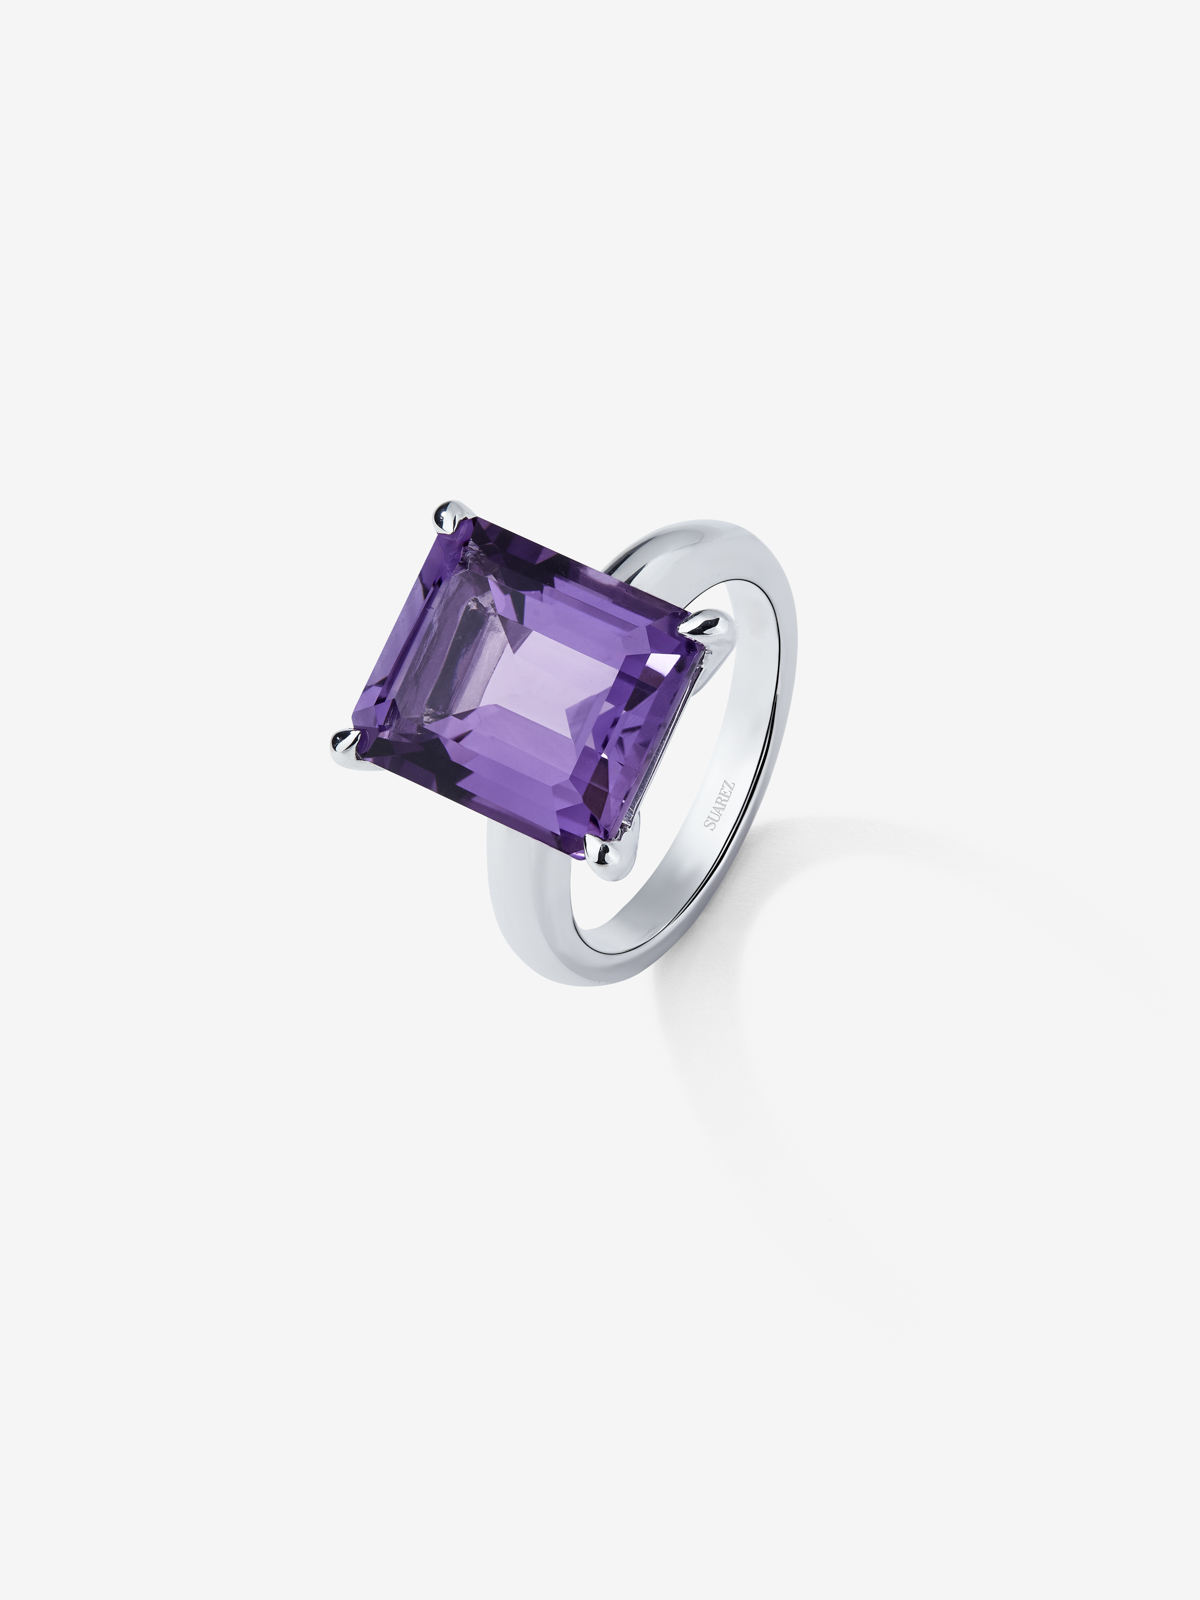 Silver ring with purple amethyst stone